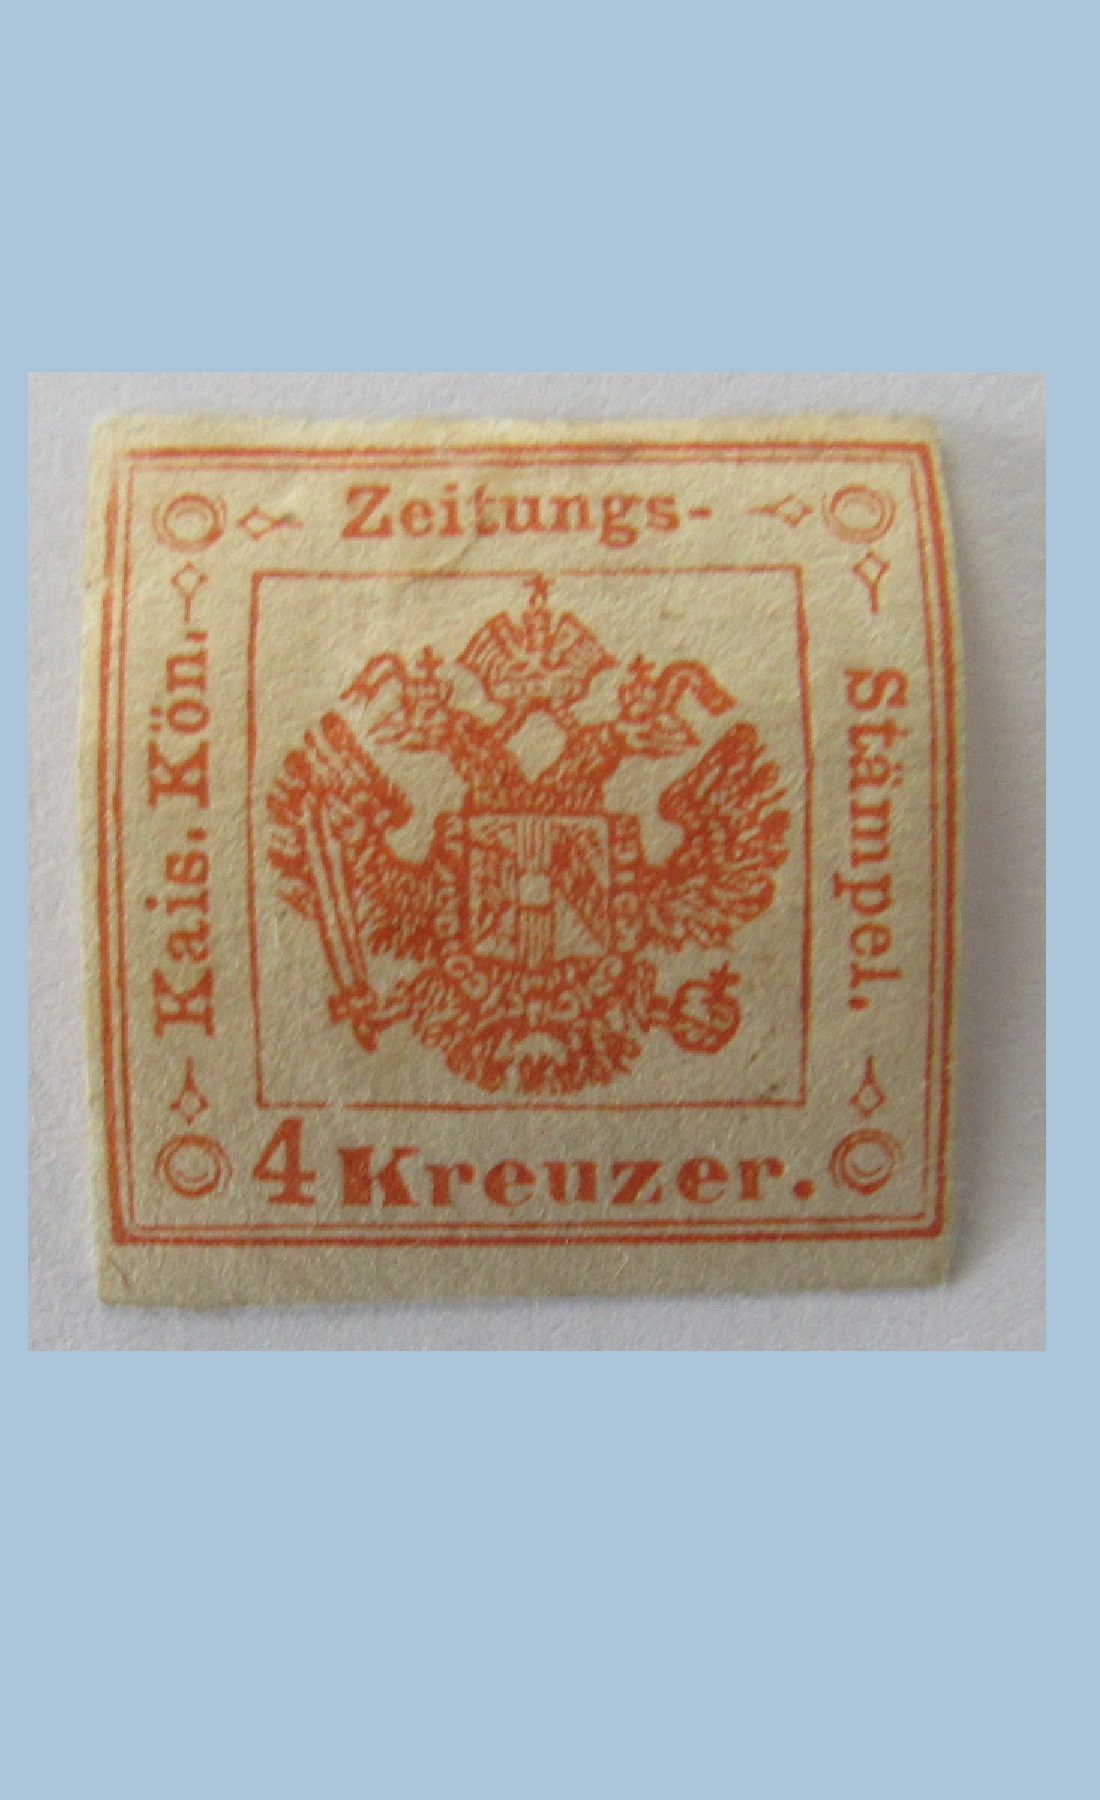 A rare Old Newspaper Stamp | Ouslet Auction